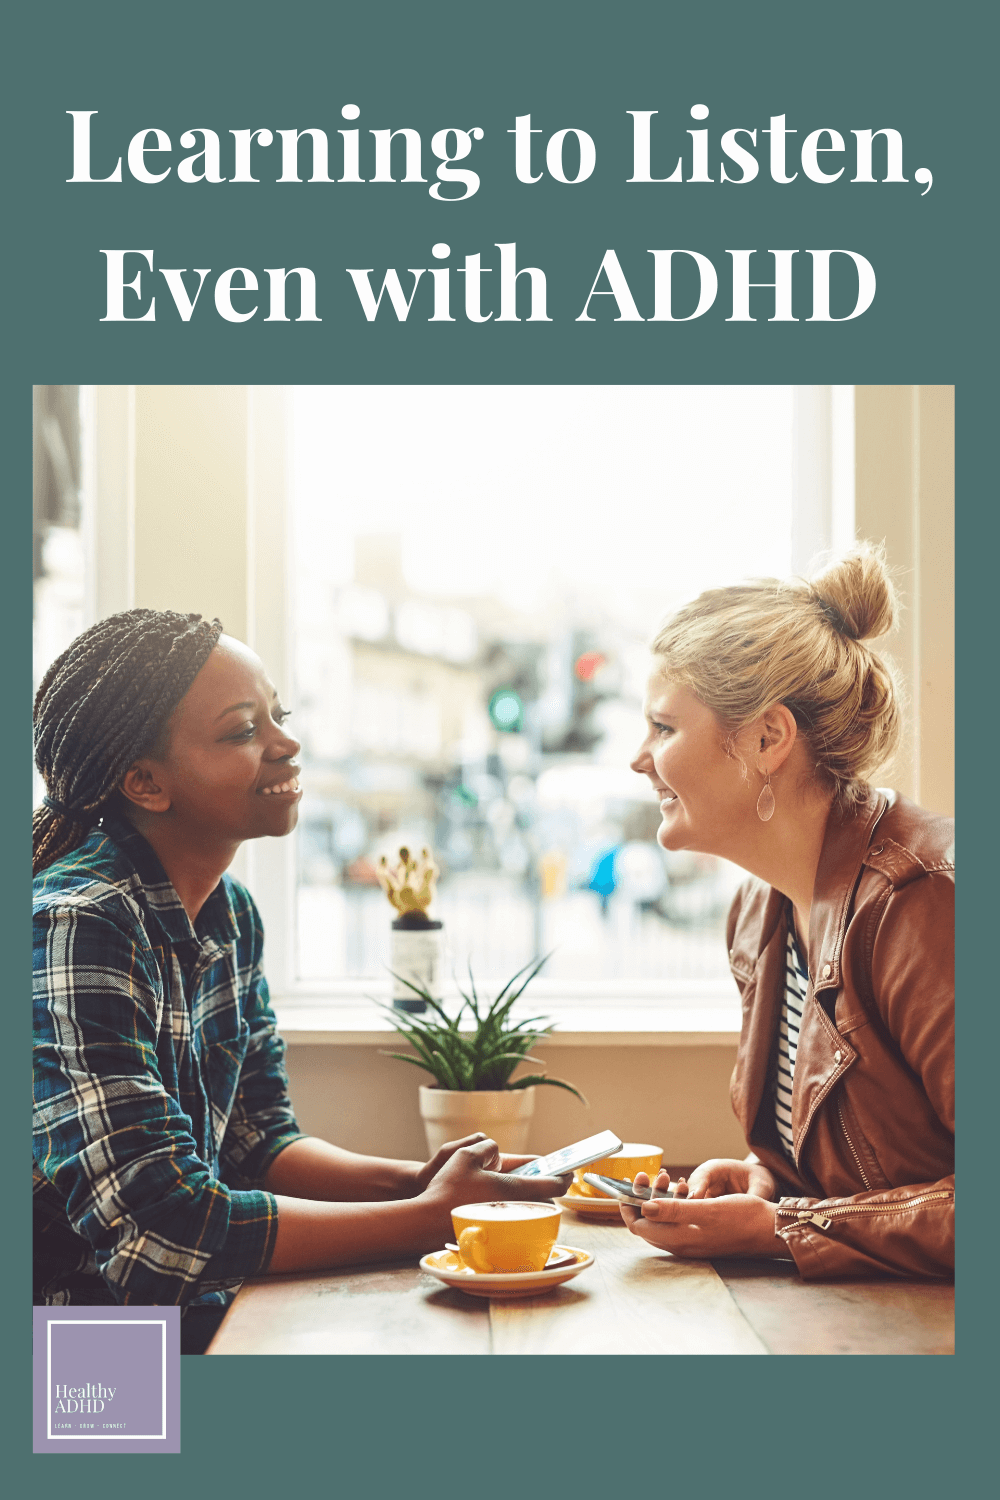 women learning how to listen with ADHD